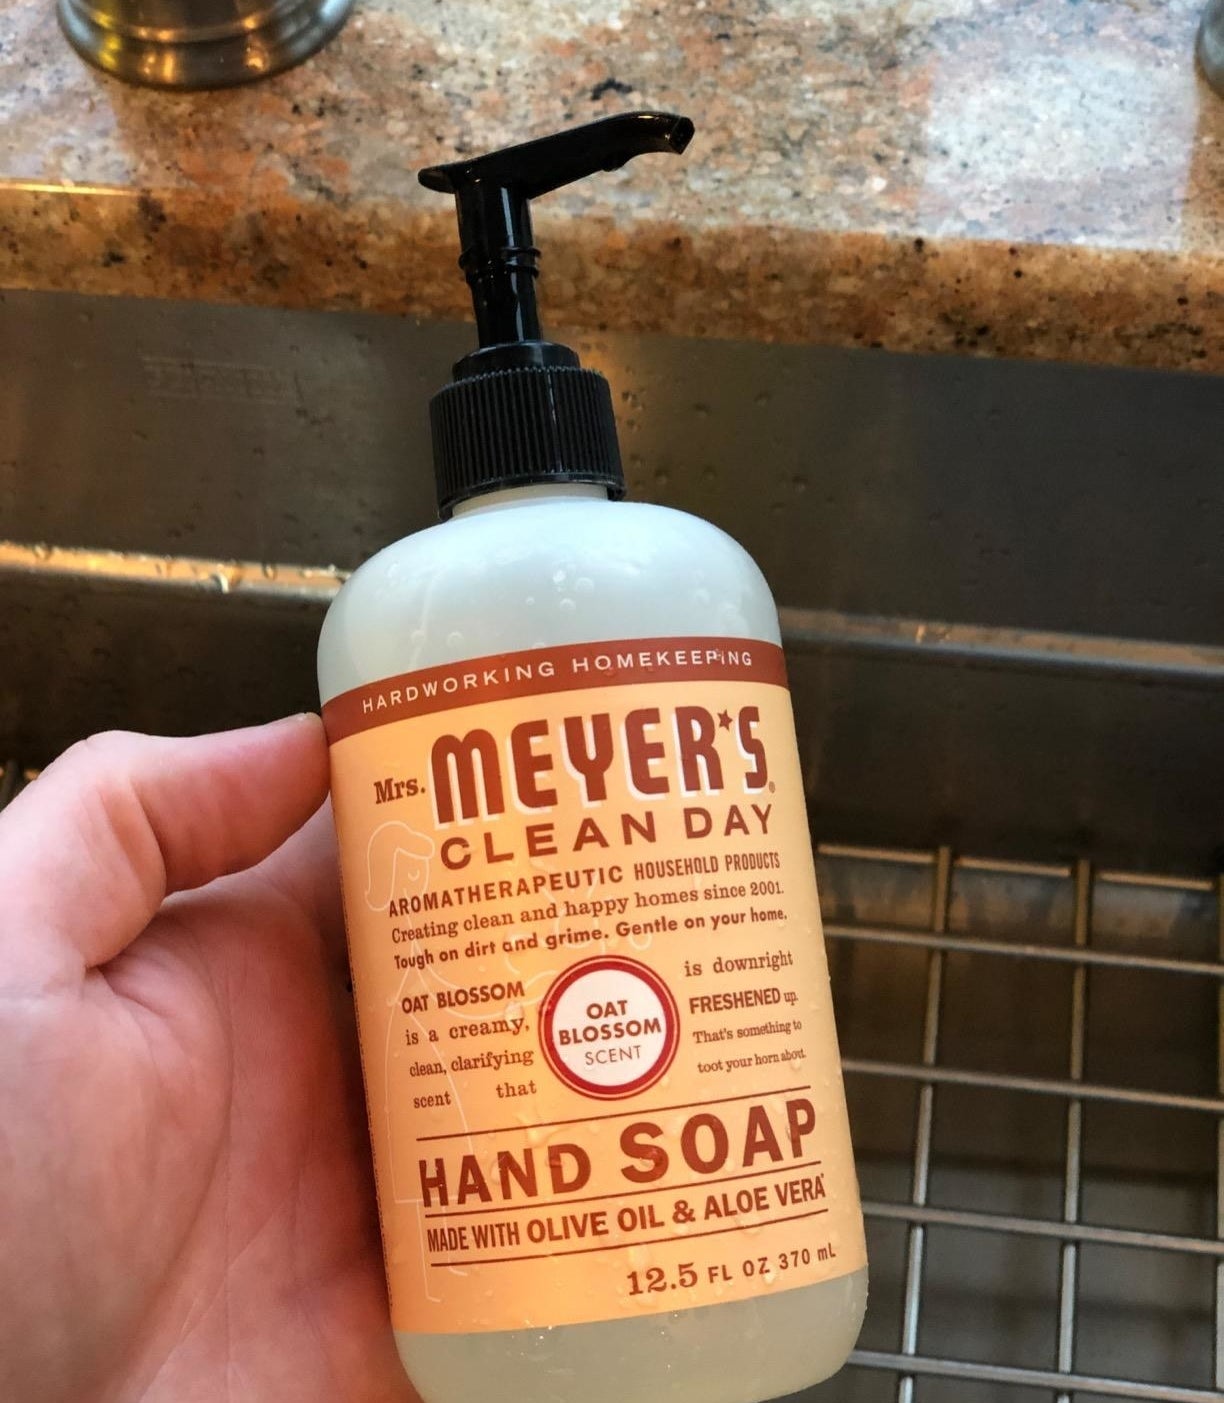 mrs. meyers hand soap in oat blossom scent